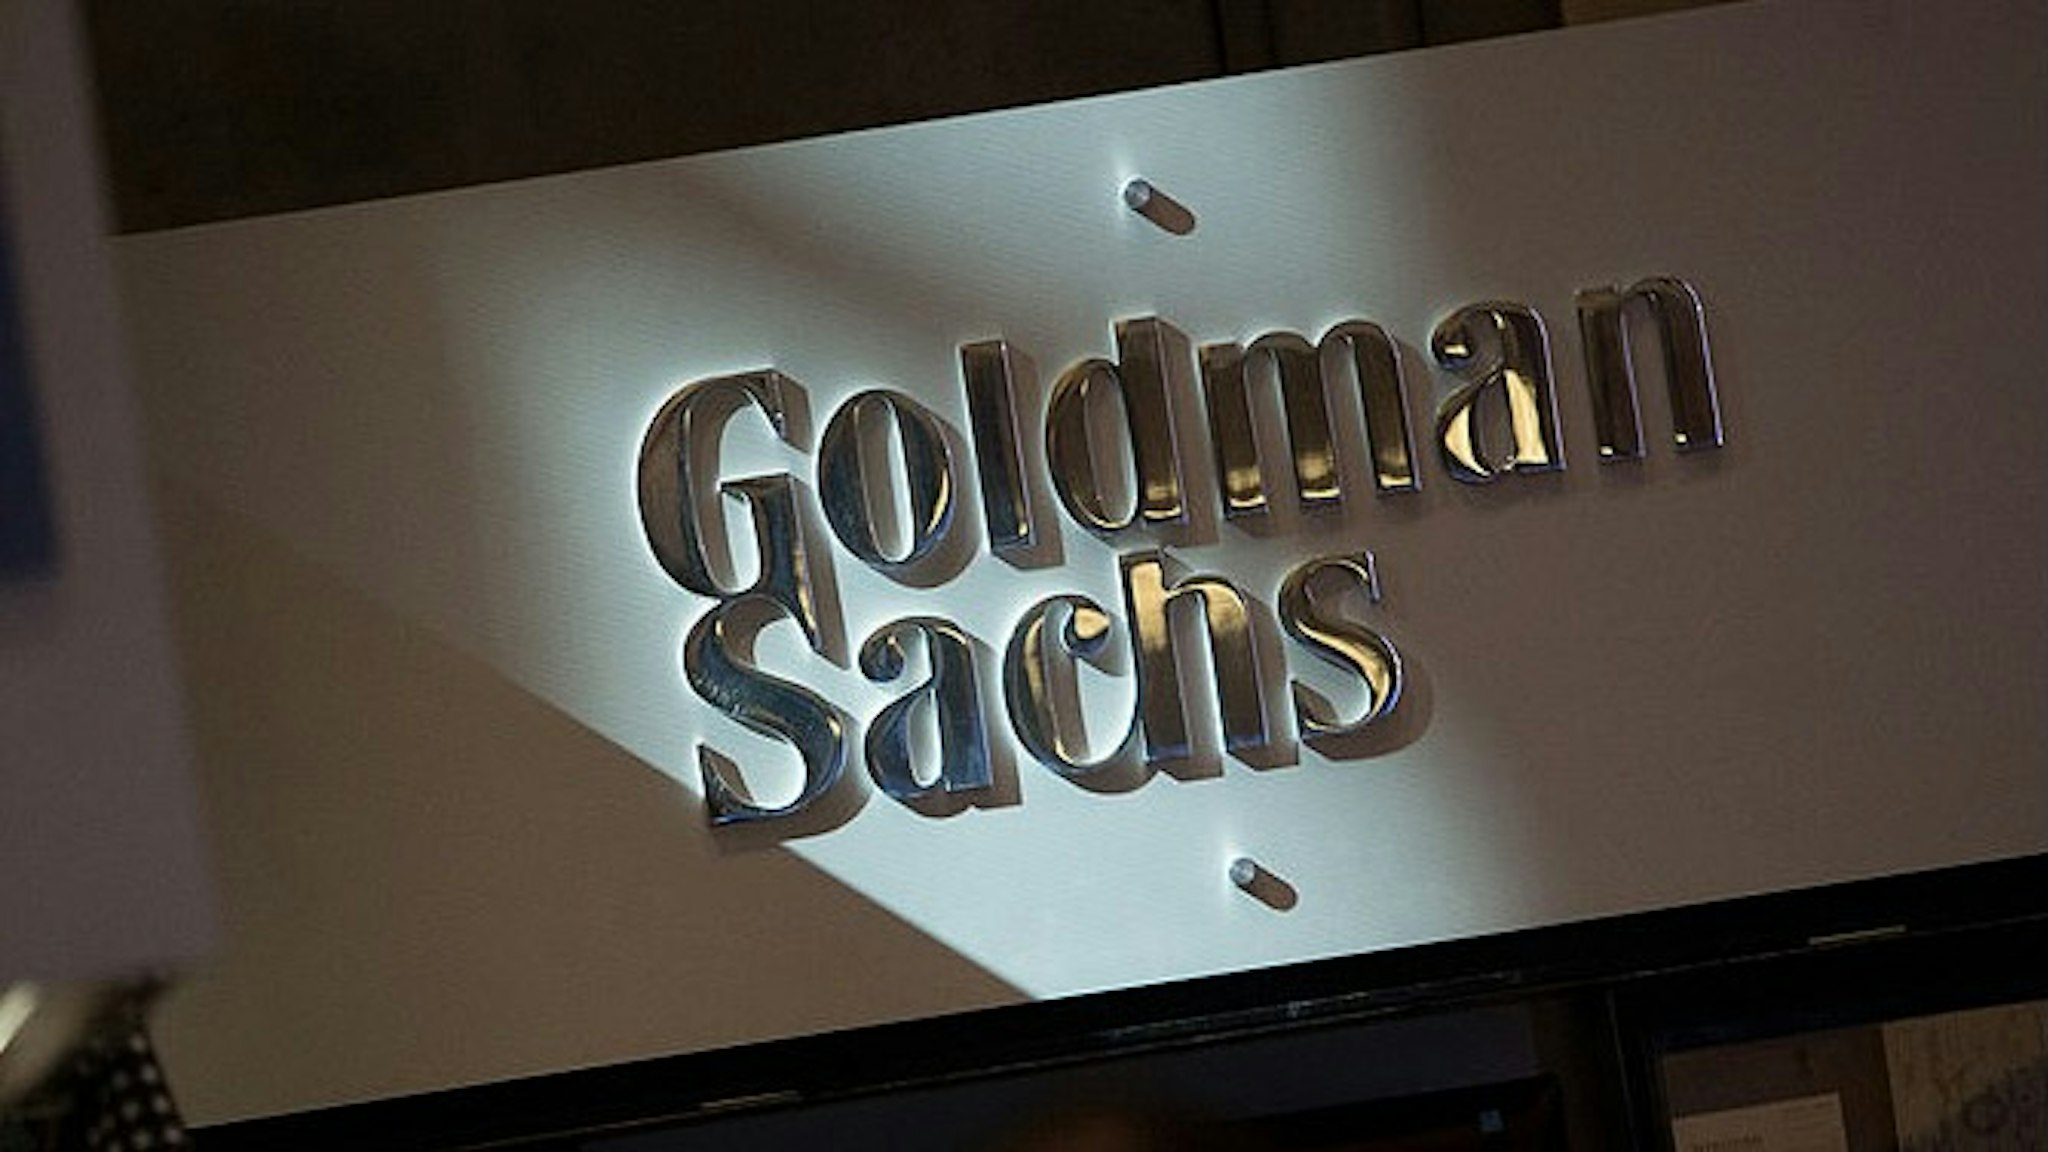 The Goldman Sachs &amp; Co. logo is displayed at the company's booth on the floor of the New York Stock Exchange (NYSE) in New York, U.S., on Friday, July 19, 2013. U.S. stocks fell after benchmark equities gauges rose to records yesterday, after disappointing earnings from Google Inc. and Microsoft Corp. overshadowed better-than-forecast results from General Electric Co. Photographer: Scott Eells/Bloomberg via Getty Images